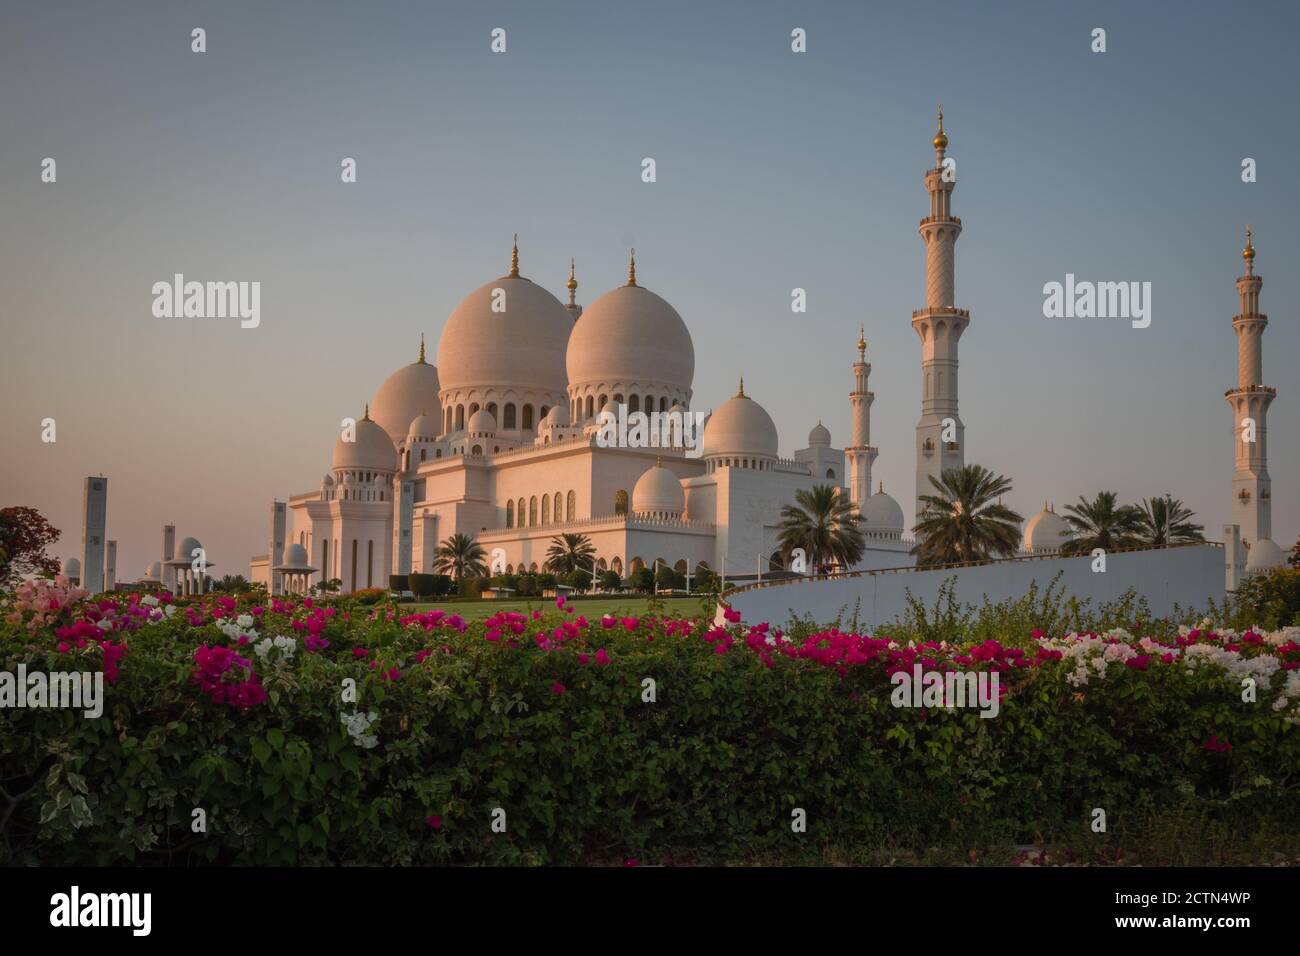 Sheikh Zayed Geand Mosque in Abu Dhabi Stock Photo